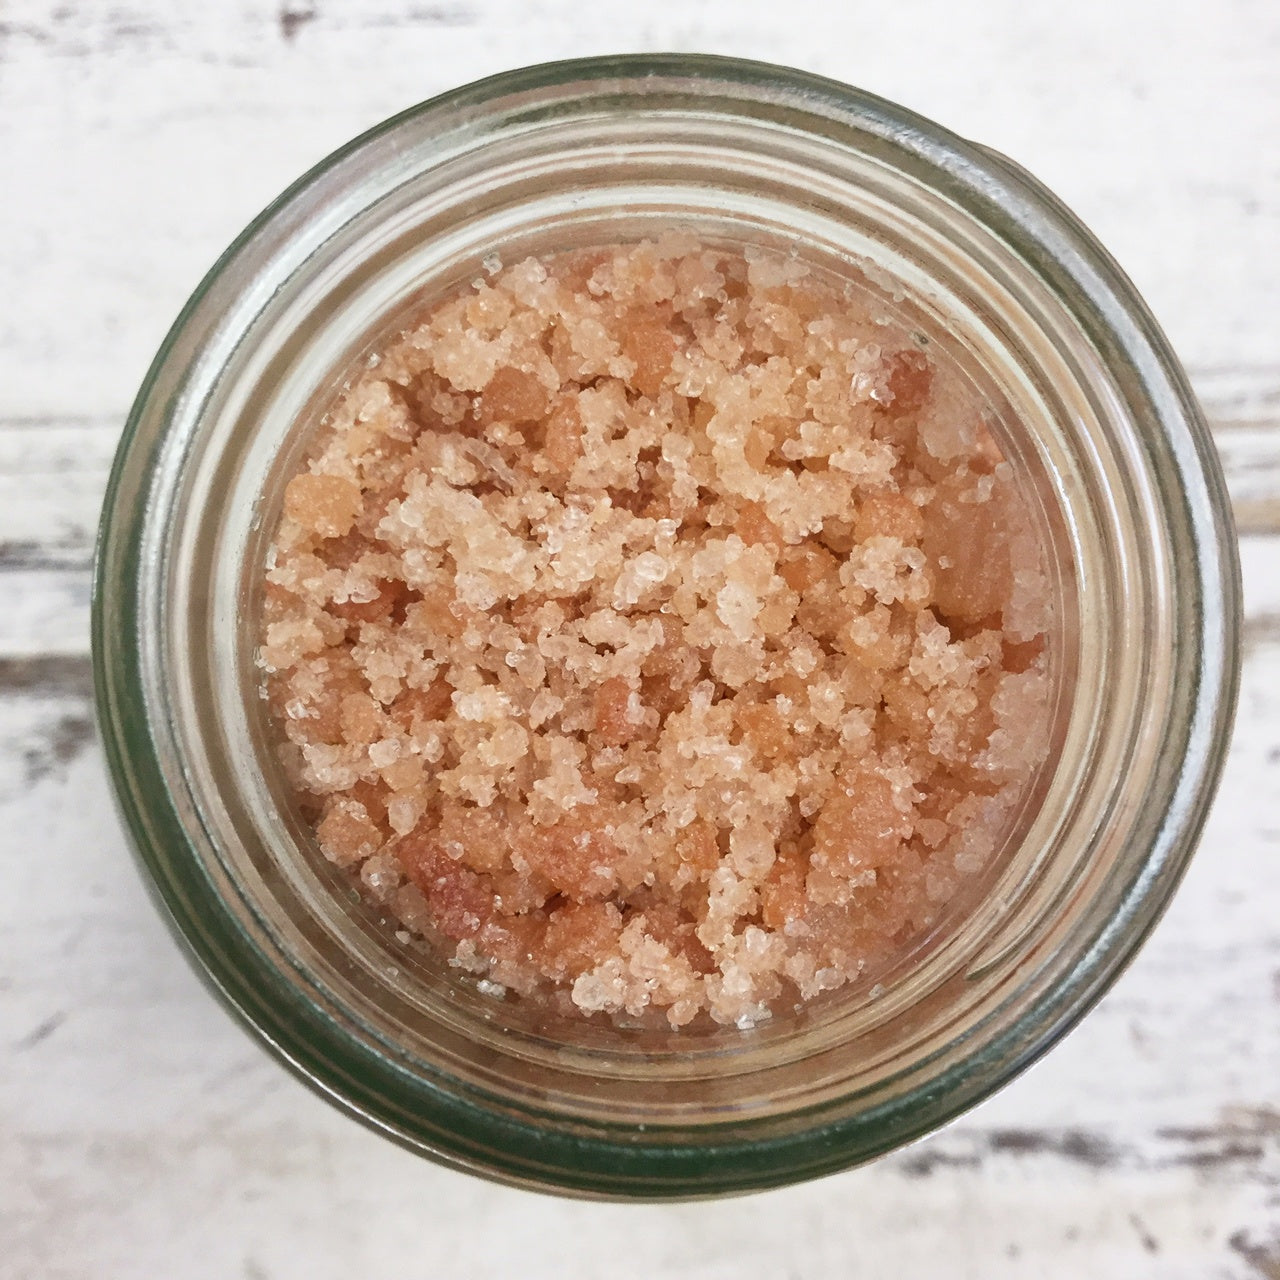 Open jar of pink bath salts viewed from above on white background